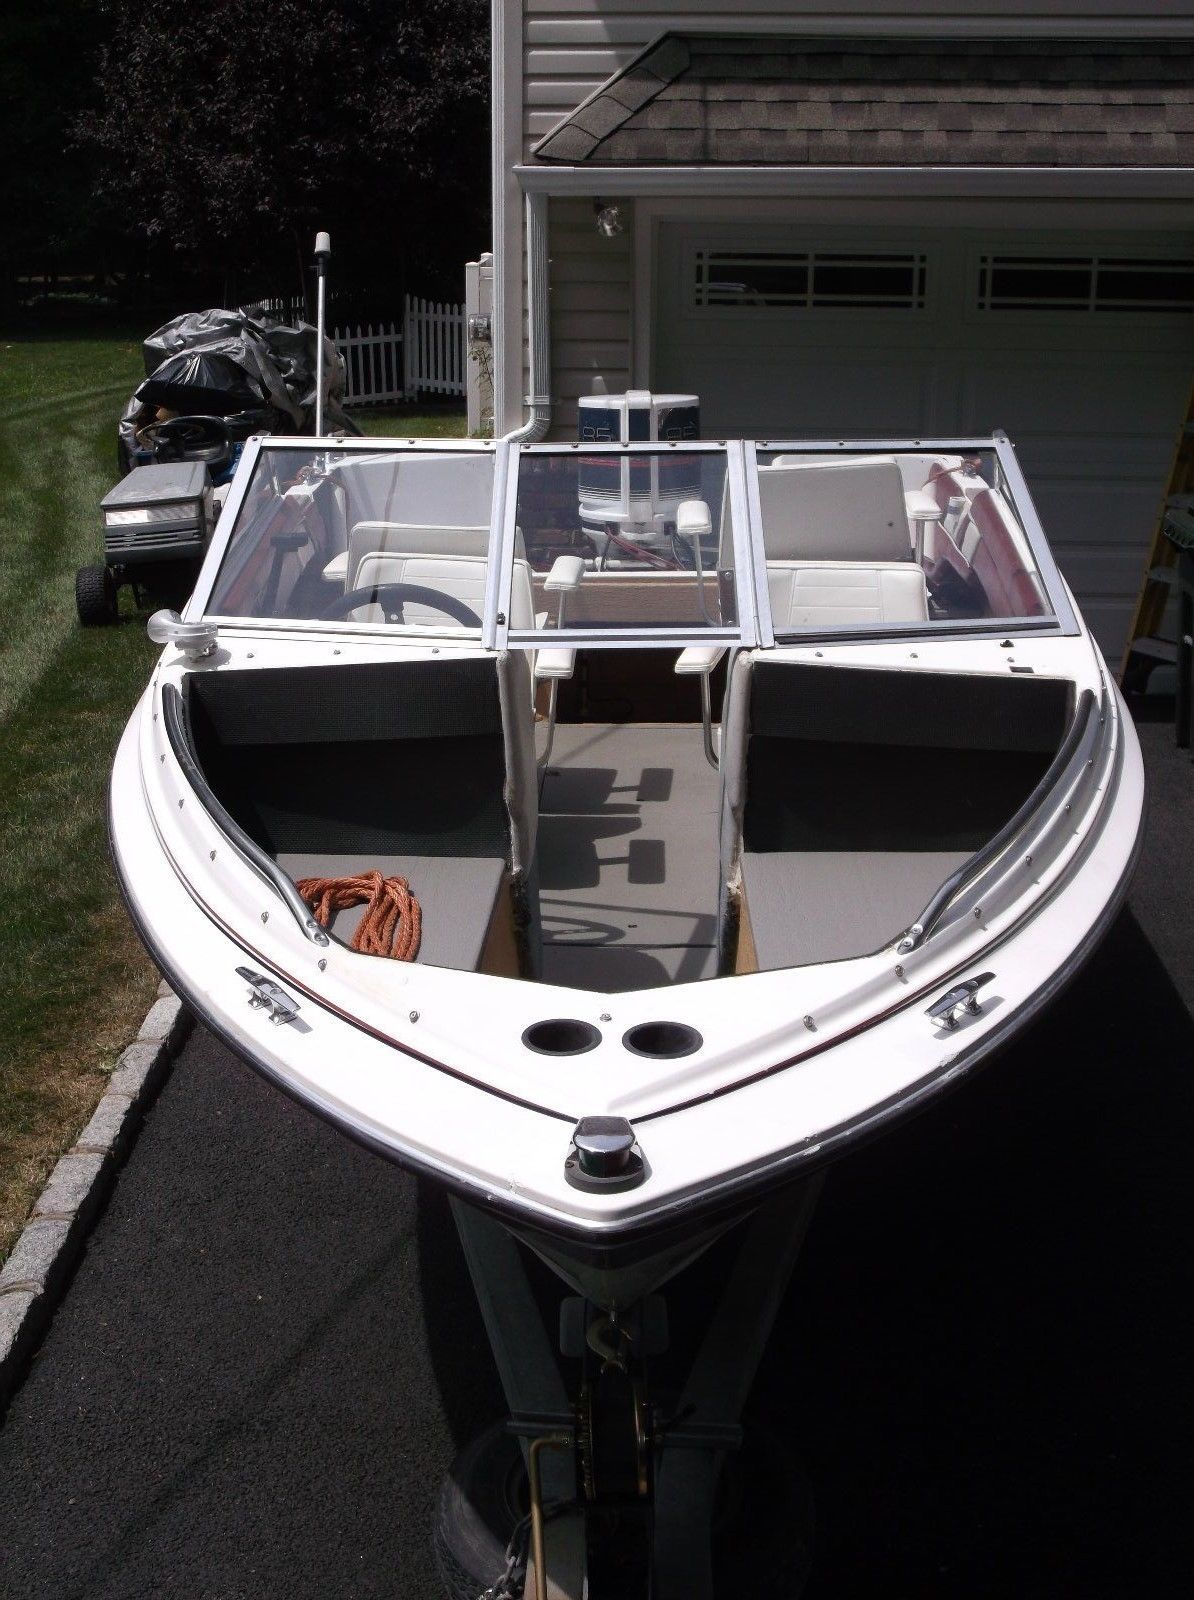 Bayliner CAPRI 1600 1986 for sale for $2,800 - Boats-from ...